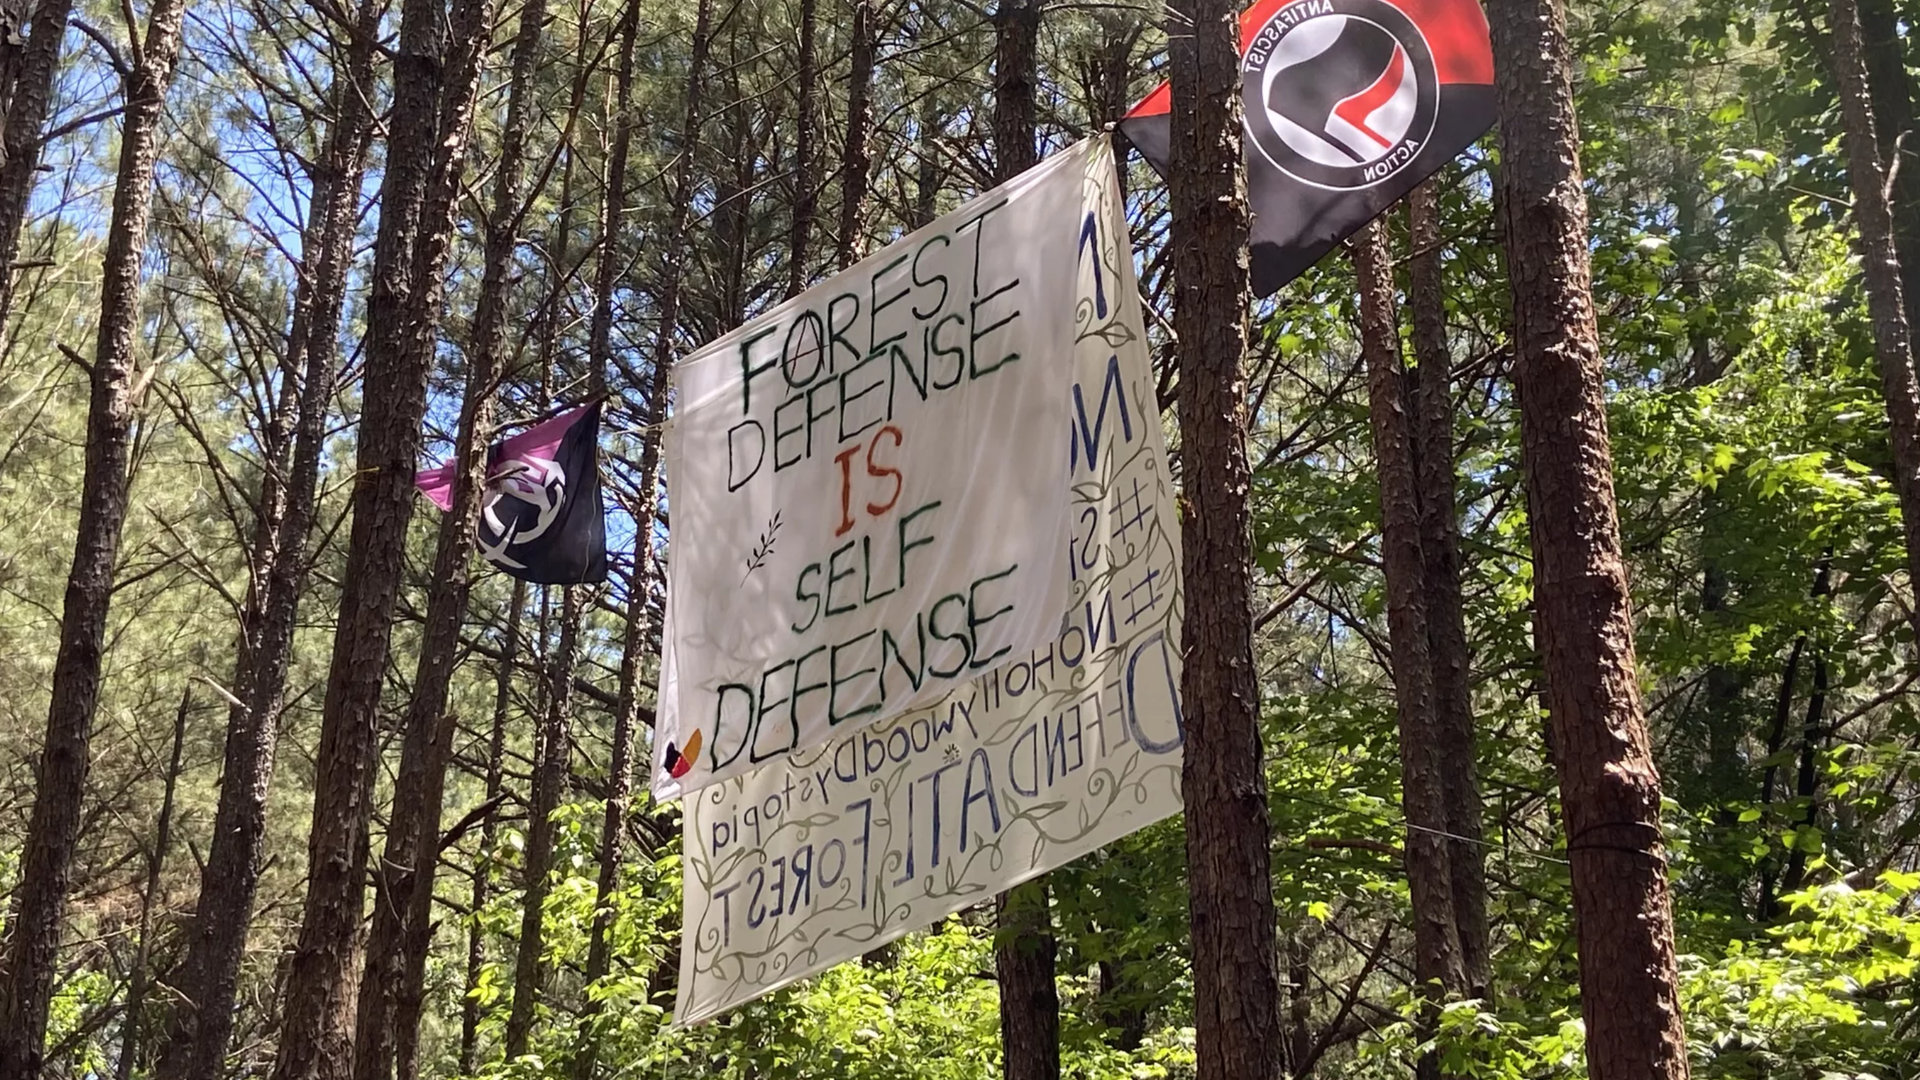 A photo of a banner urging people to "defend Atlanta forest" hanging between two trees in Atlanta woods